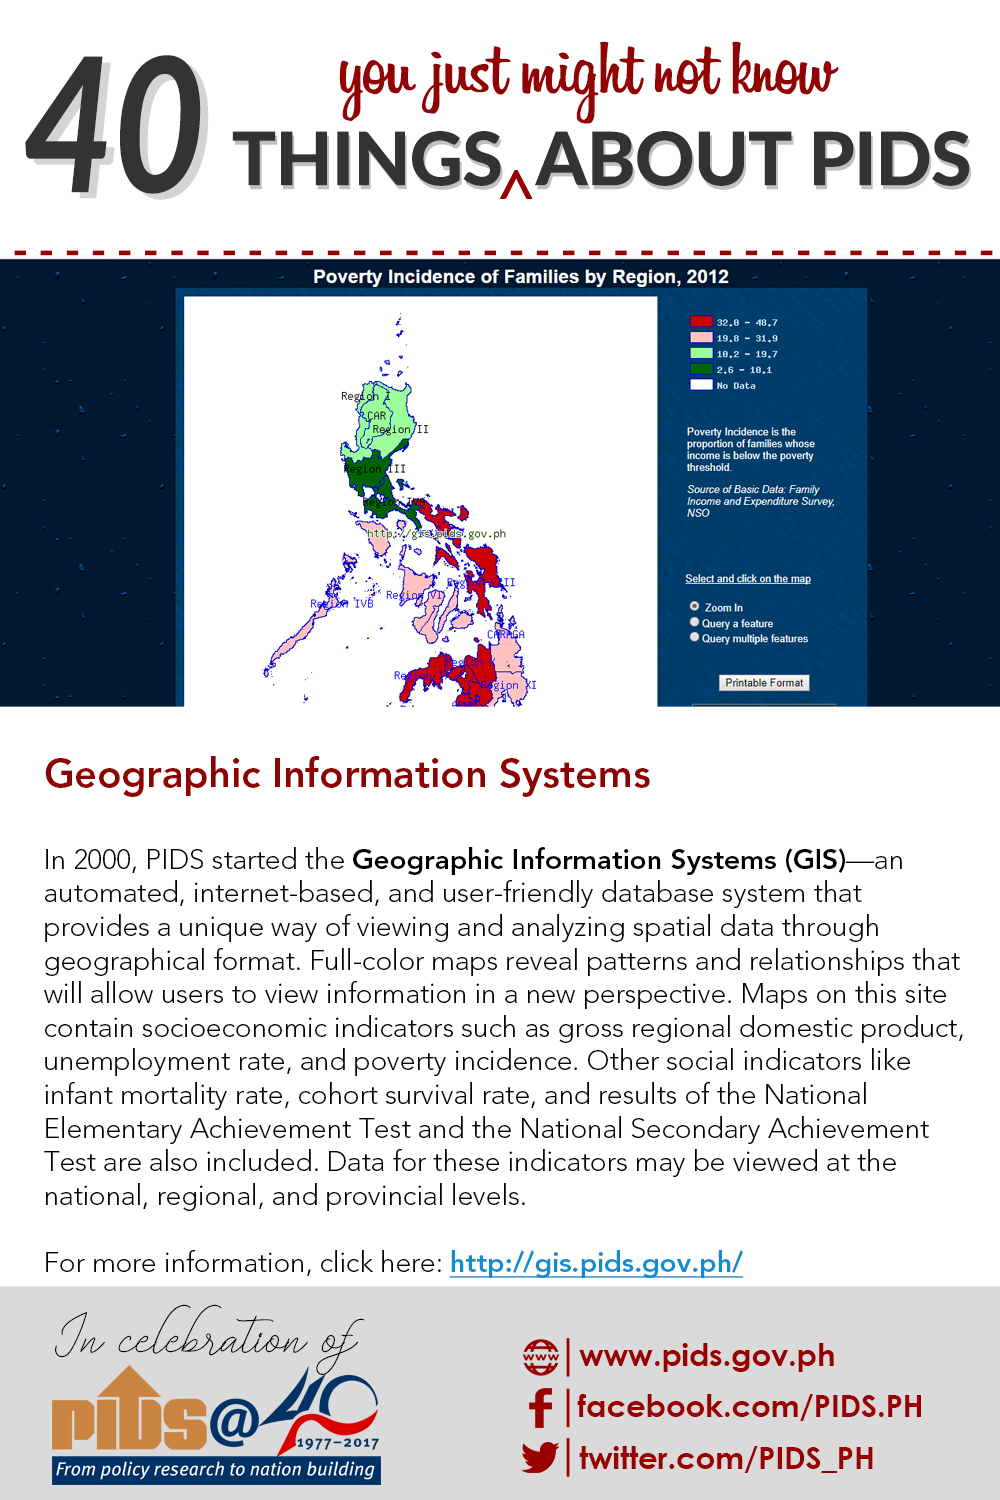 20of40-things_about_pids-gis.jpg